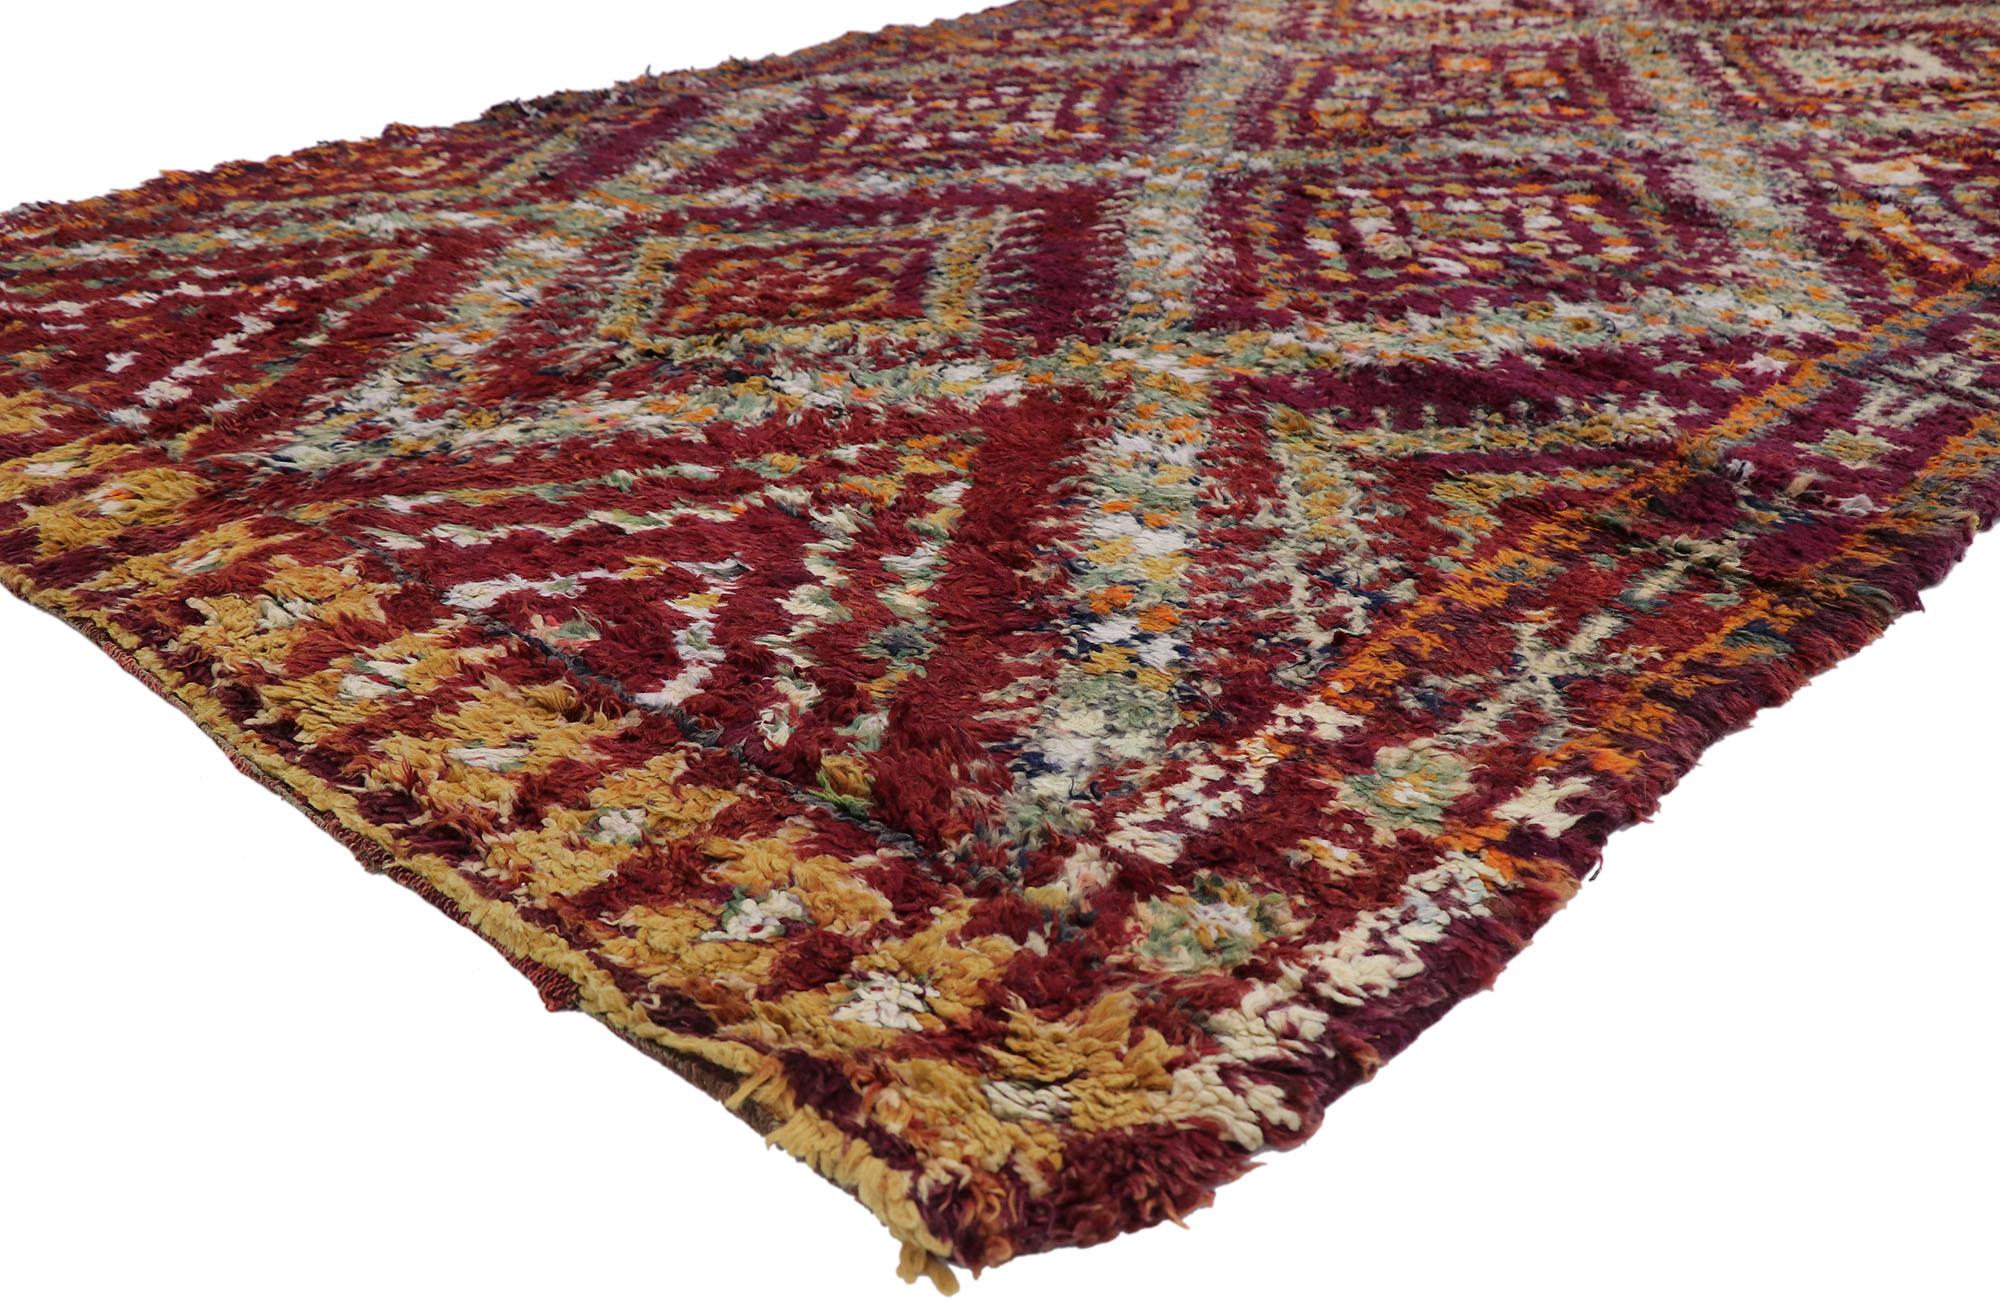 21212 Vintage Berber Beni M'Guild Moroccan rug with Tribal Style 06'01 x 10'03. Showcasing a bold expressive design, incredible detail and texture, this hand knotted wool vintage Berber Beni M'Guild Moroccan rug is a captivating vision of woven